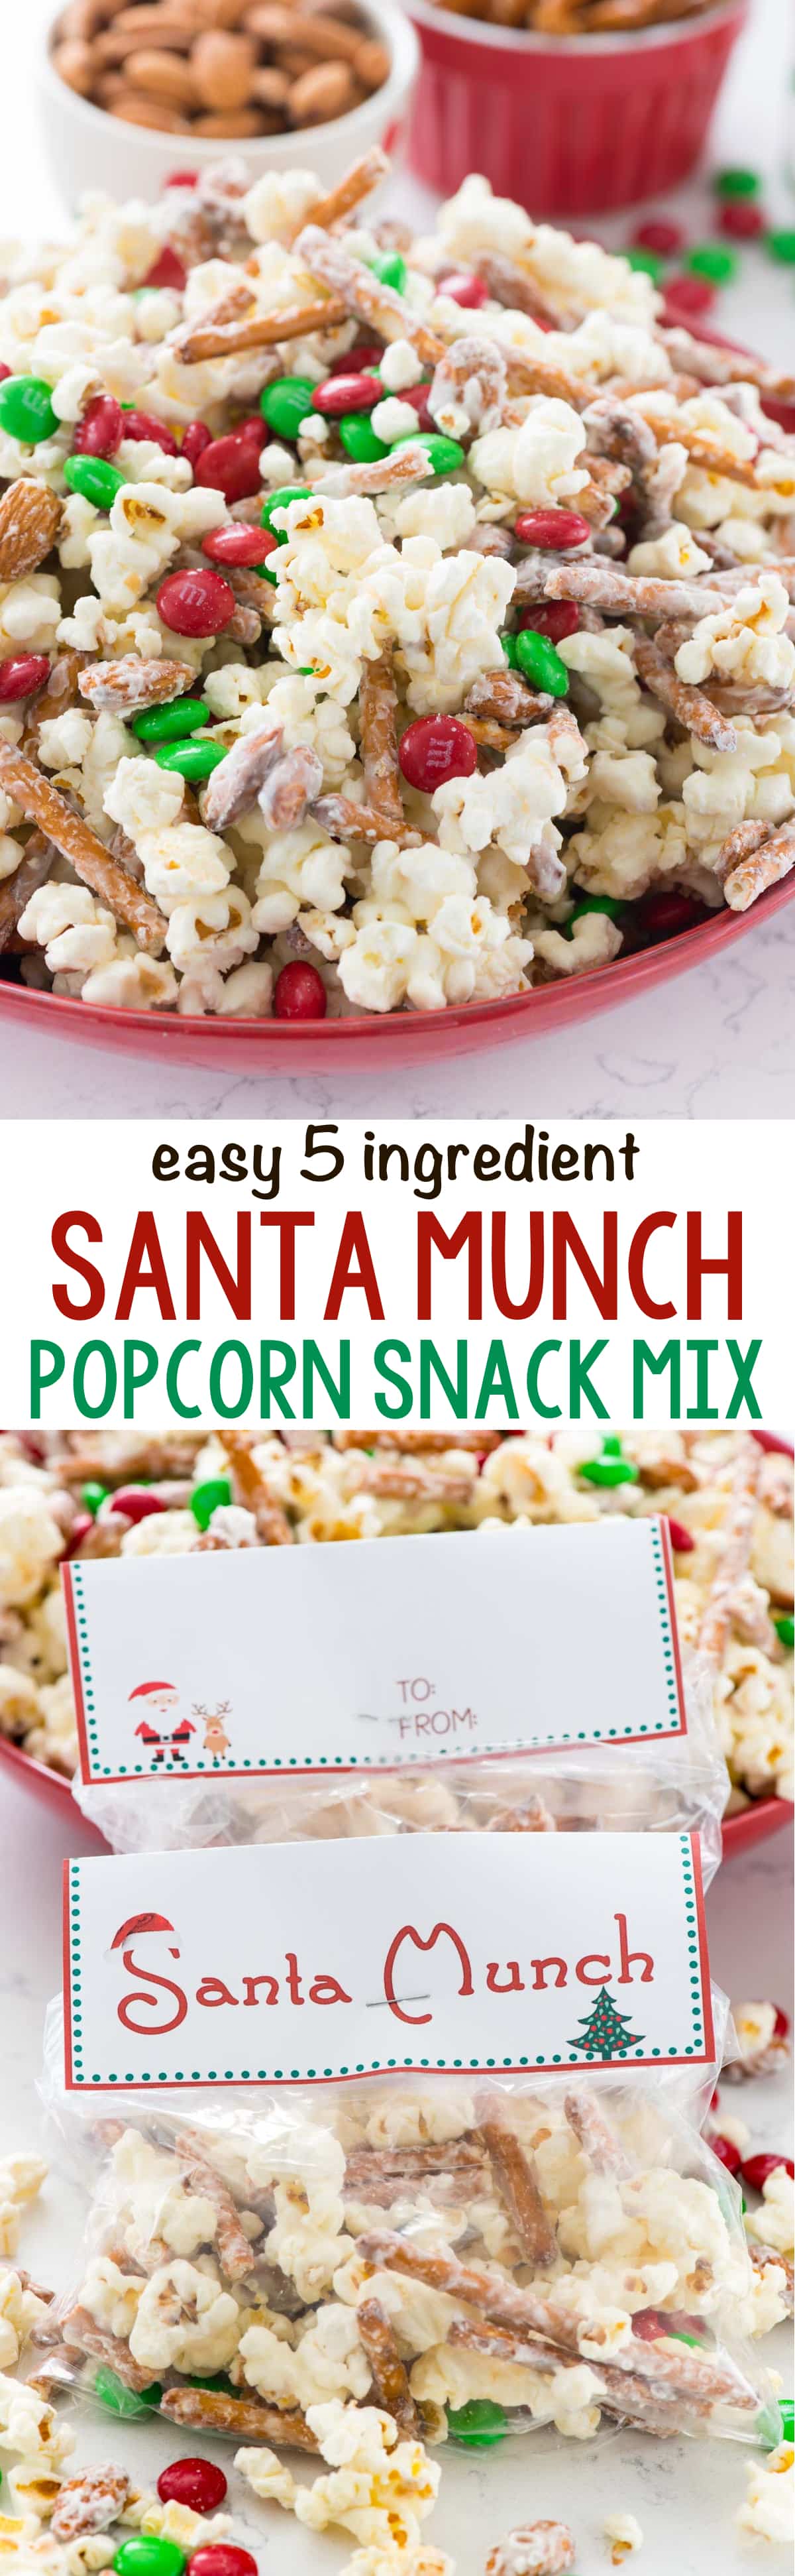 Santa Munch - this EASY 5 ingredient Popcorn Snack Mix is coated in white chocolate and makes the perfect snack for Christmas! Santa loves it...but the kids do too! Make them as goodie bags with the free printable!